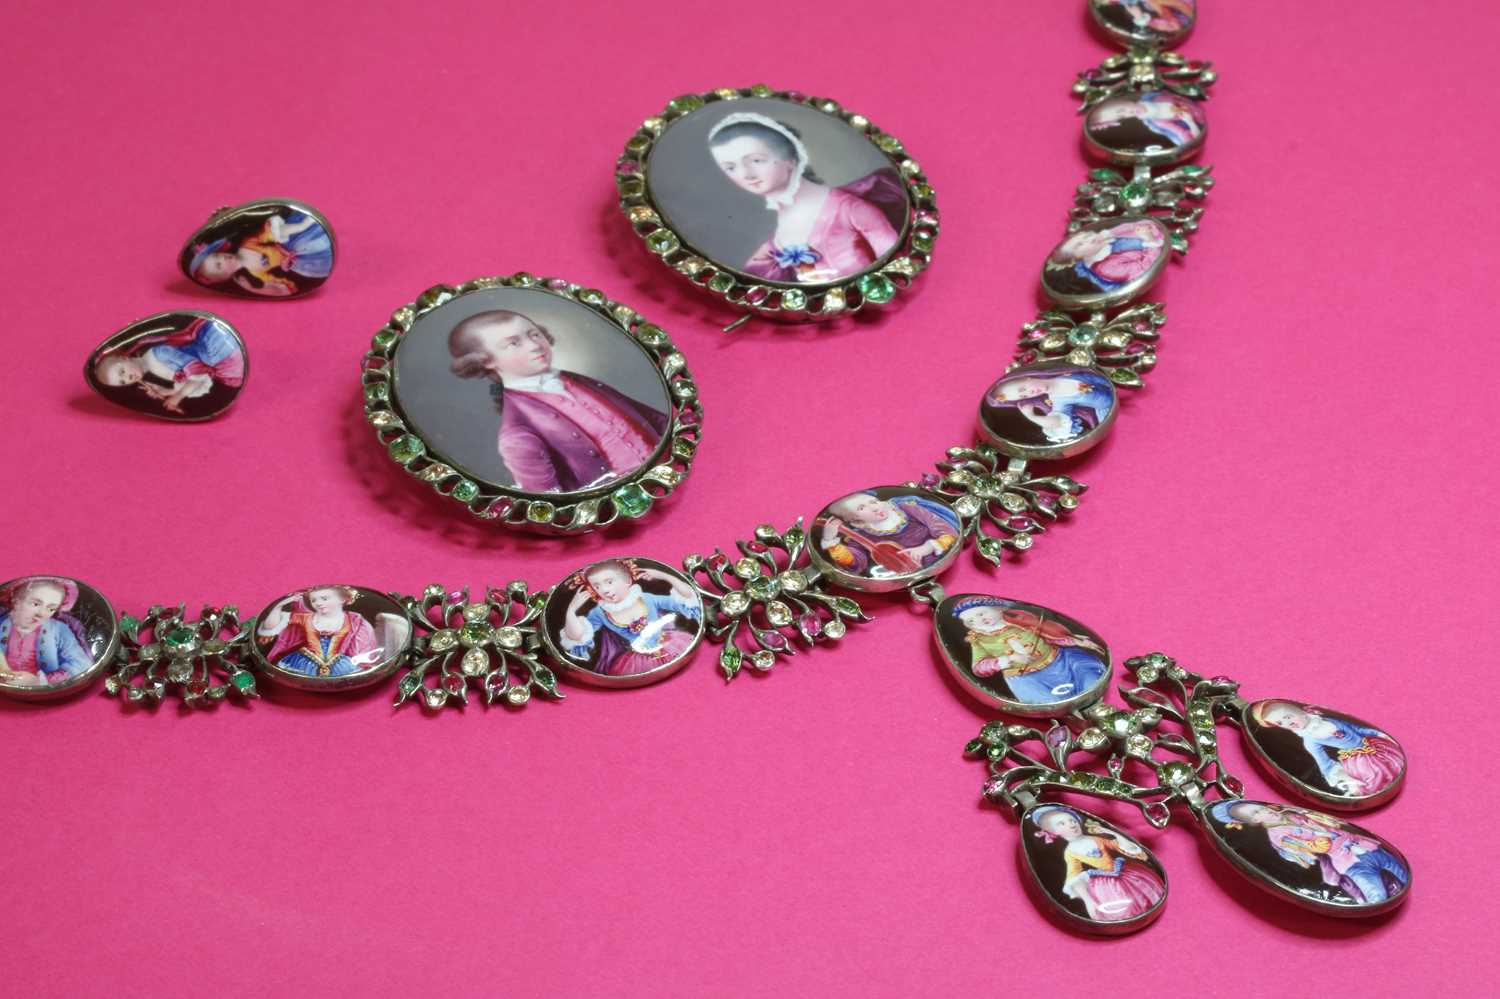 An 18th century enamelled portrait miniature necklace, earrings and pair of clasps, cased suite, - Image 6 of 6